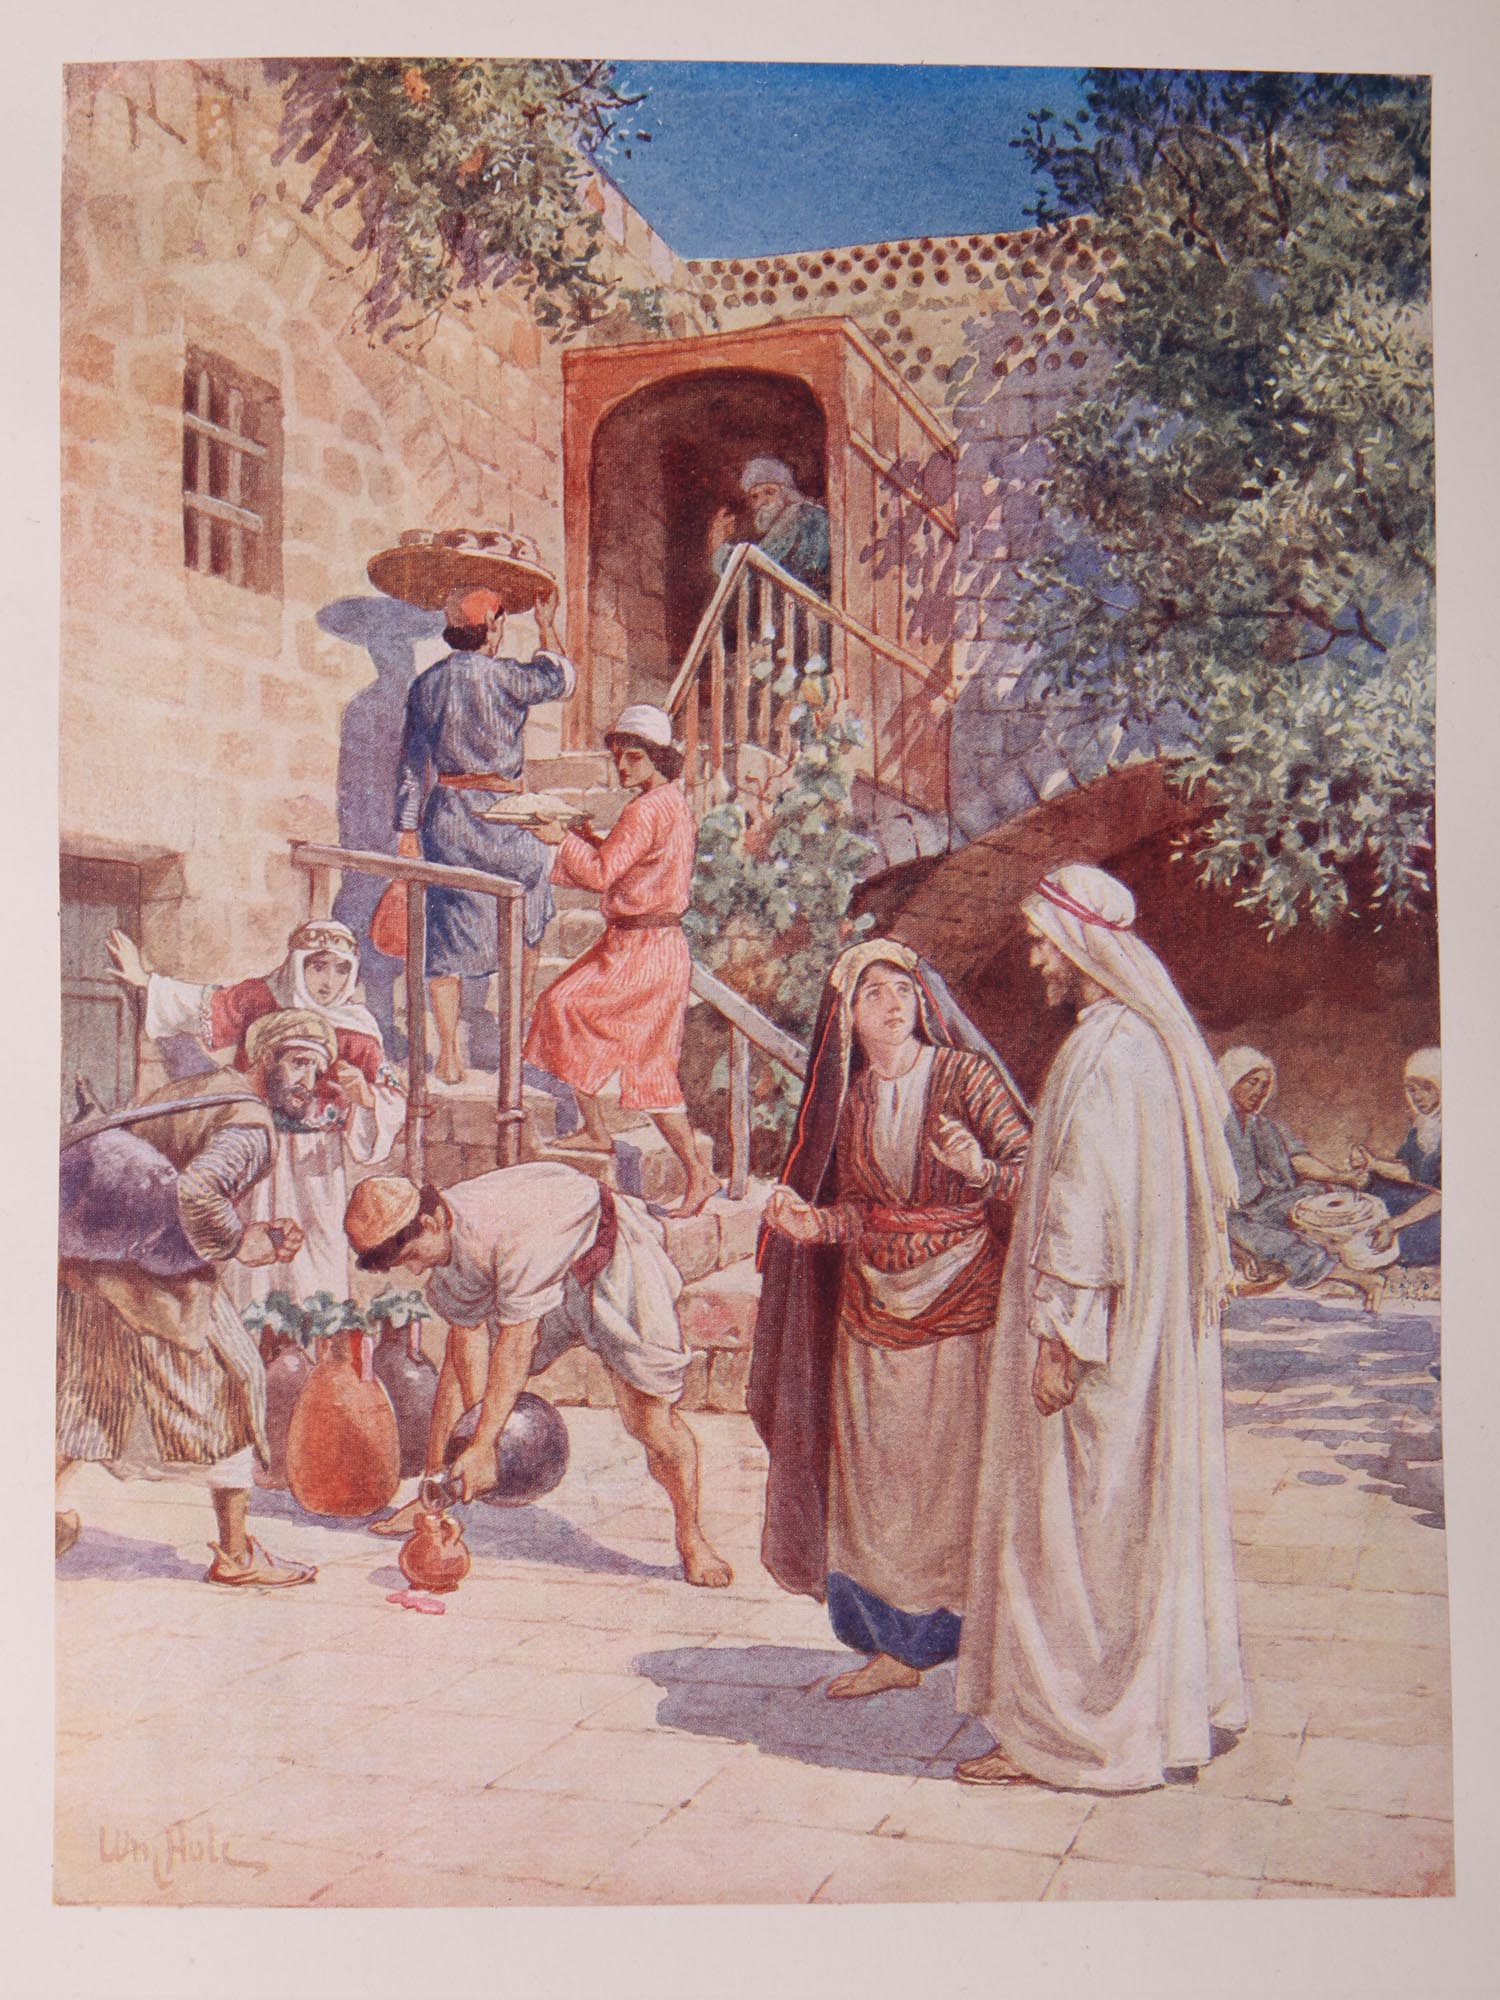 THE LIFE OF JESUS OF NAZARETH BY WILLIAM HOLE PIC-8